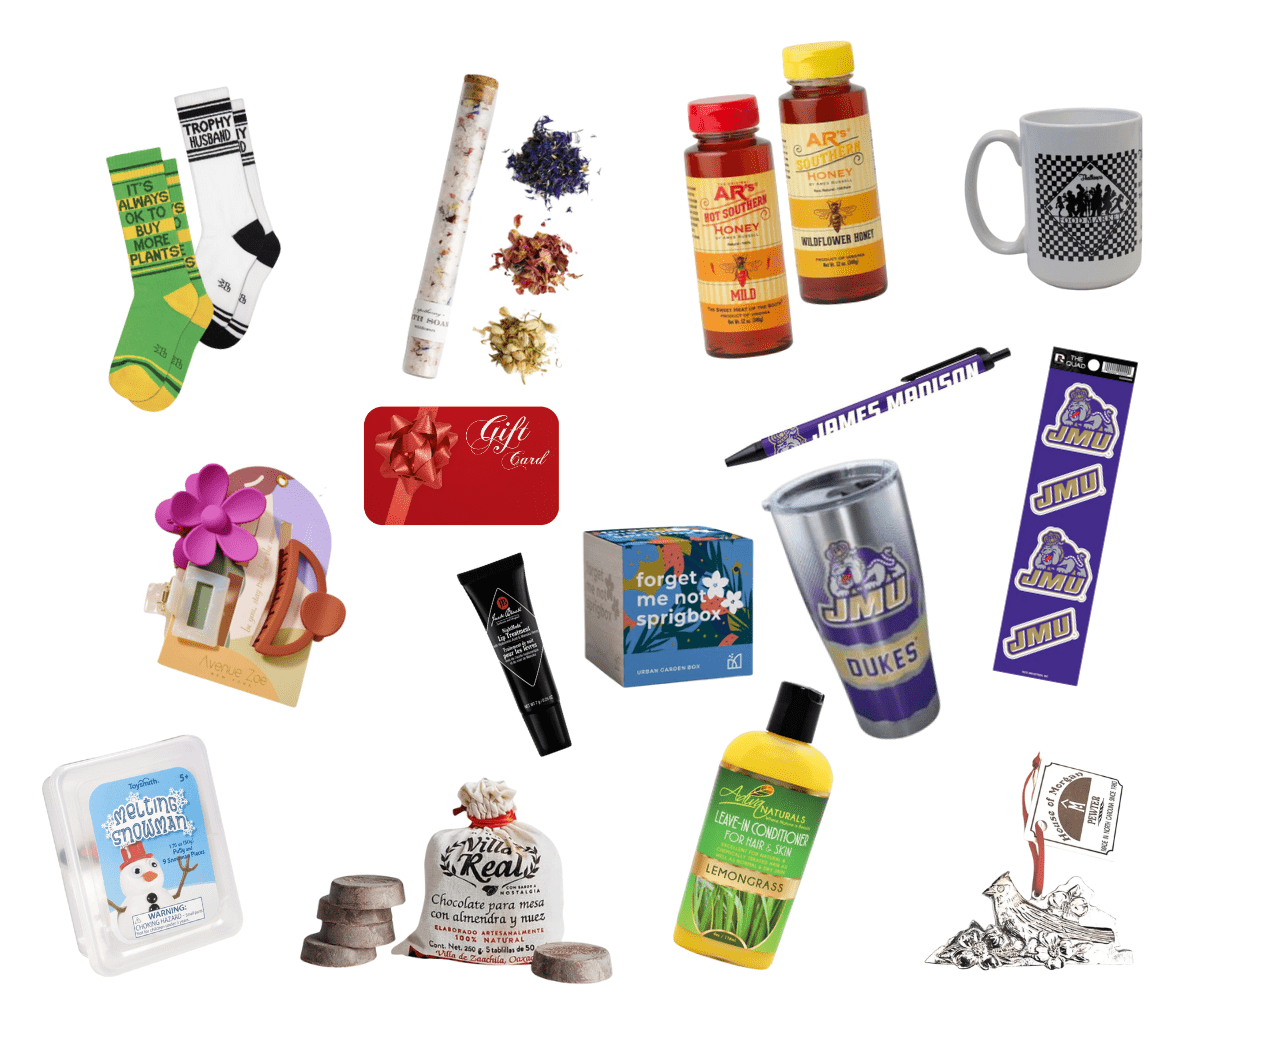 A collage of stocking stuffer ideas from local Richmond businesses